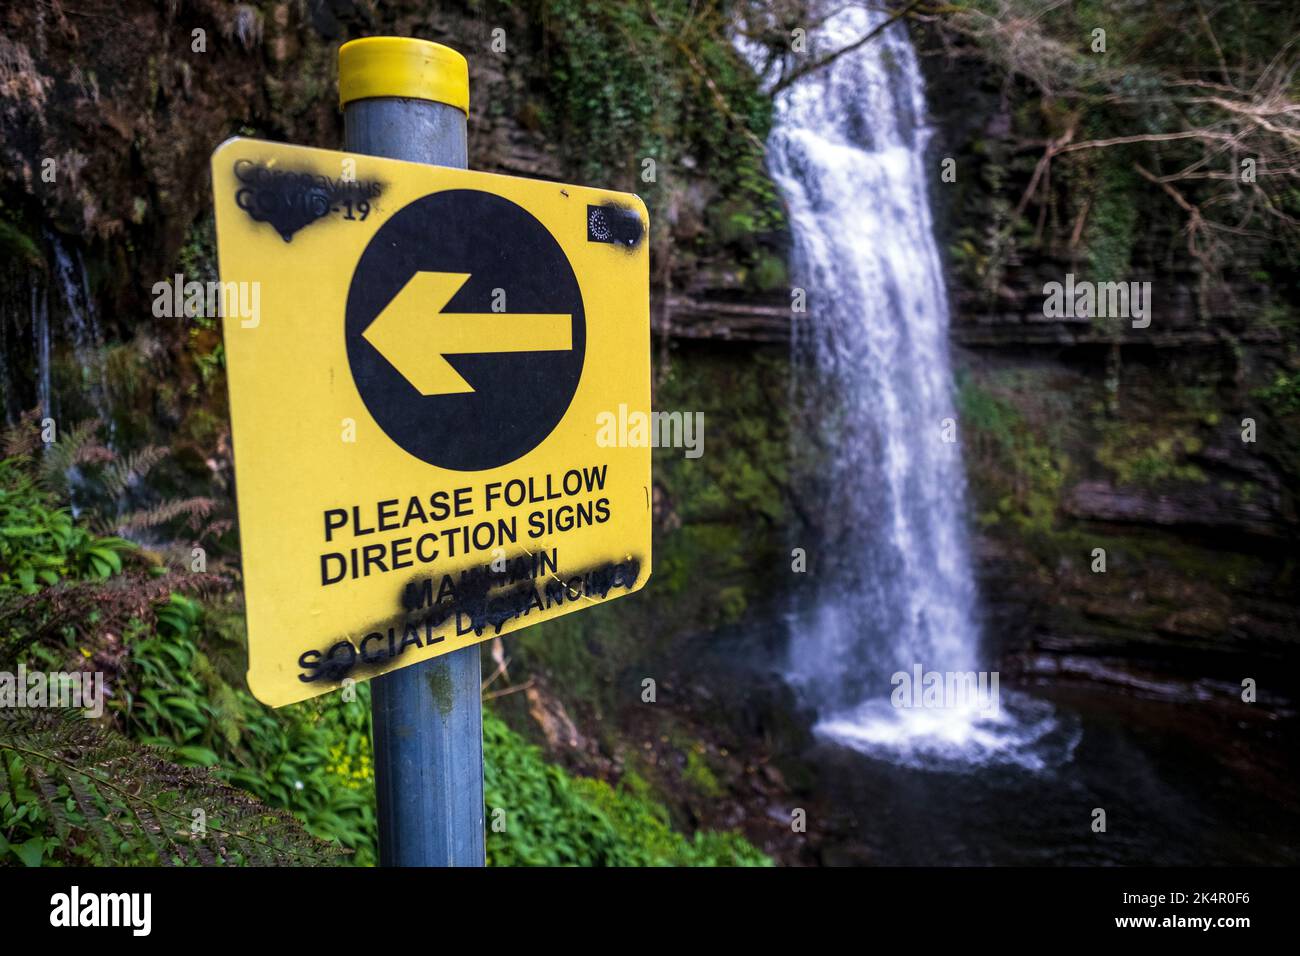 Vandalized sign asking hikers to social distance, Glencar Waterfall, County Leitrim, Ireland Stock Photo